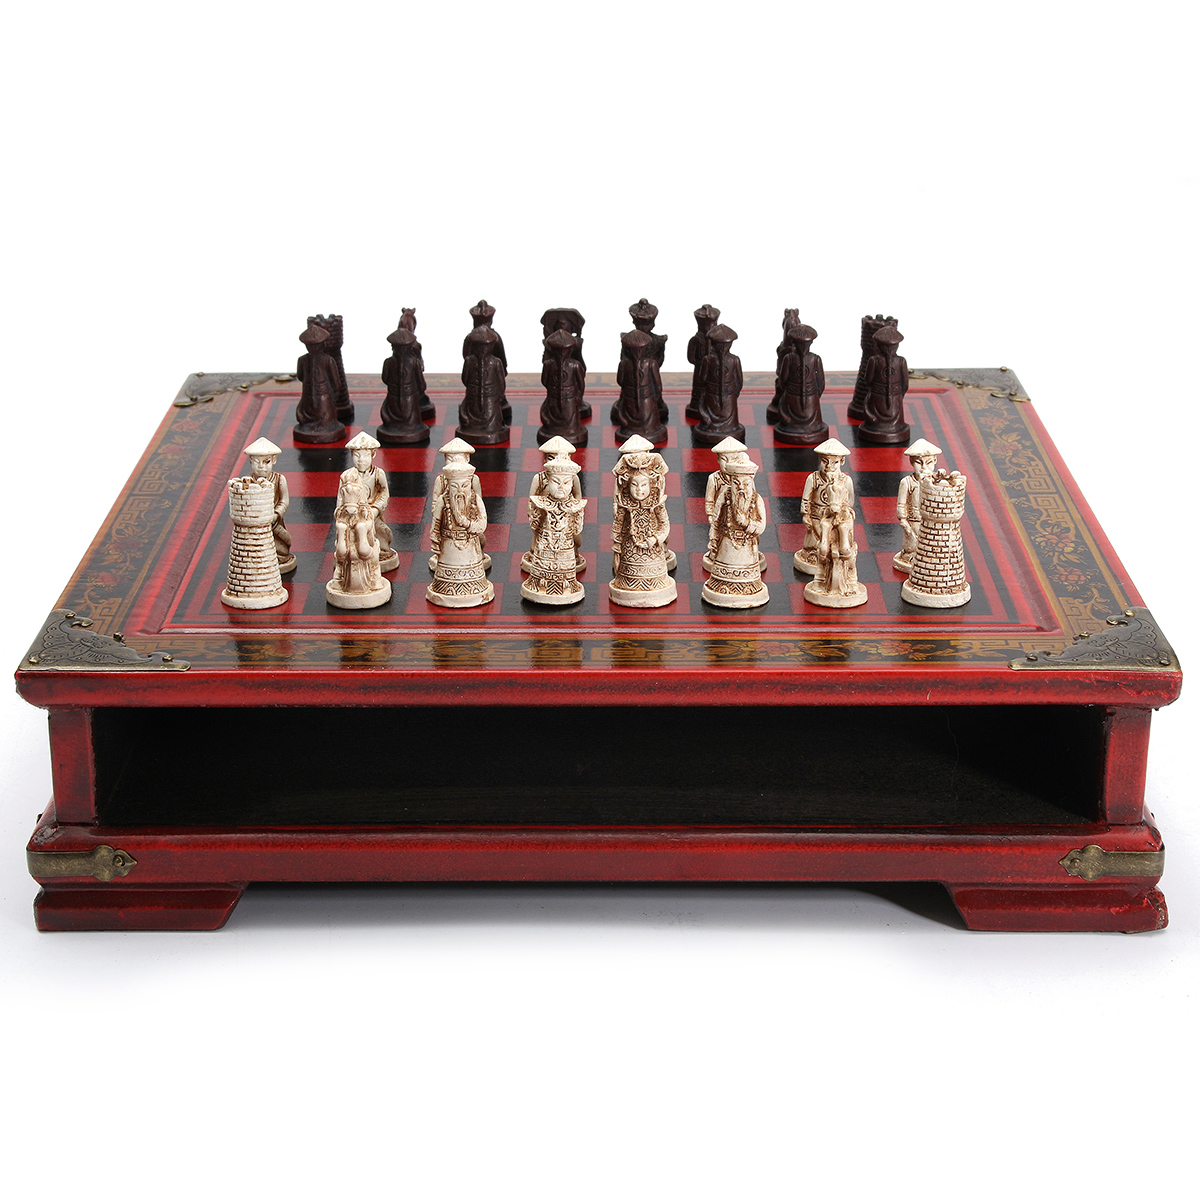 32PcsSet-Resin-Chinese-Chess-With-Coffee-Wooden-Table-Vintage-Collectibles-Gift-1108169-2